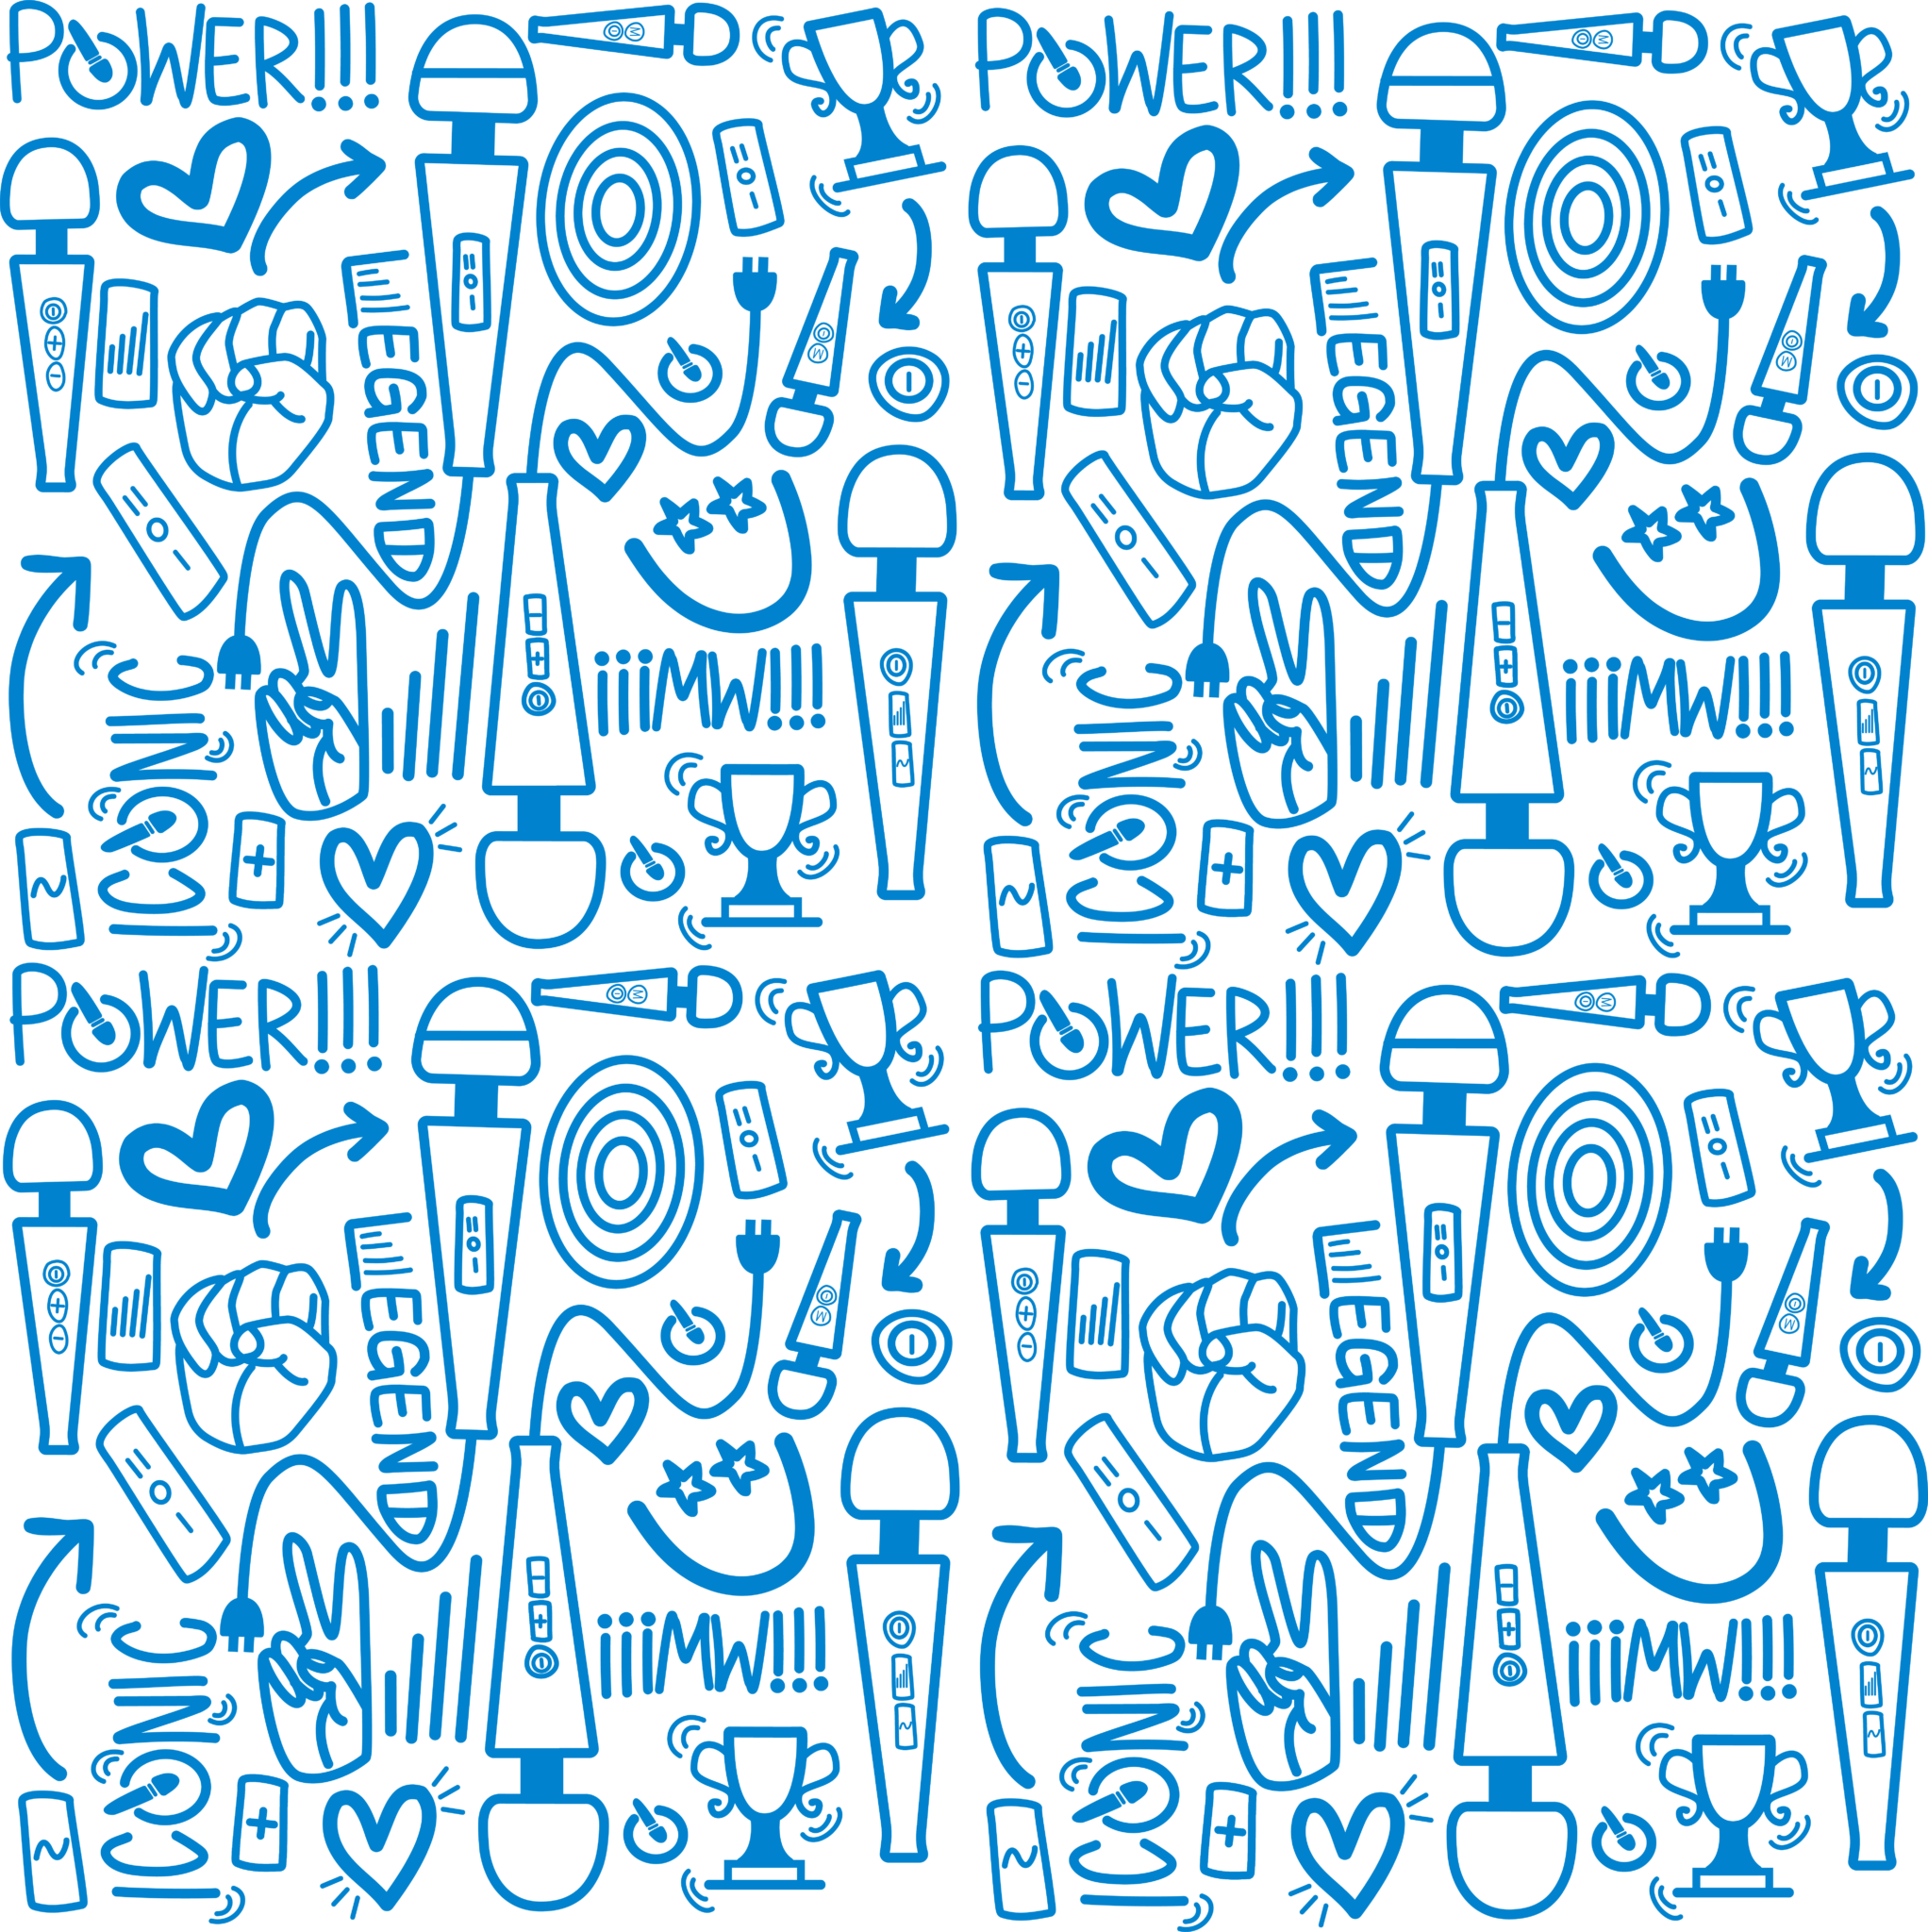 Magic Wand print by Julie Mollo featuring soft blue doodles of the Magic Wand vibrator, smileys, and trophies.